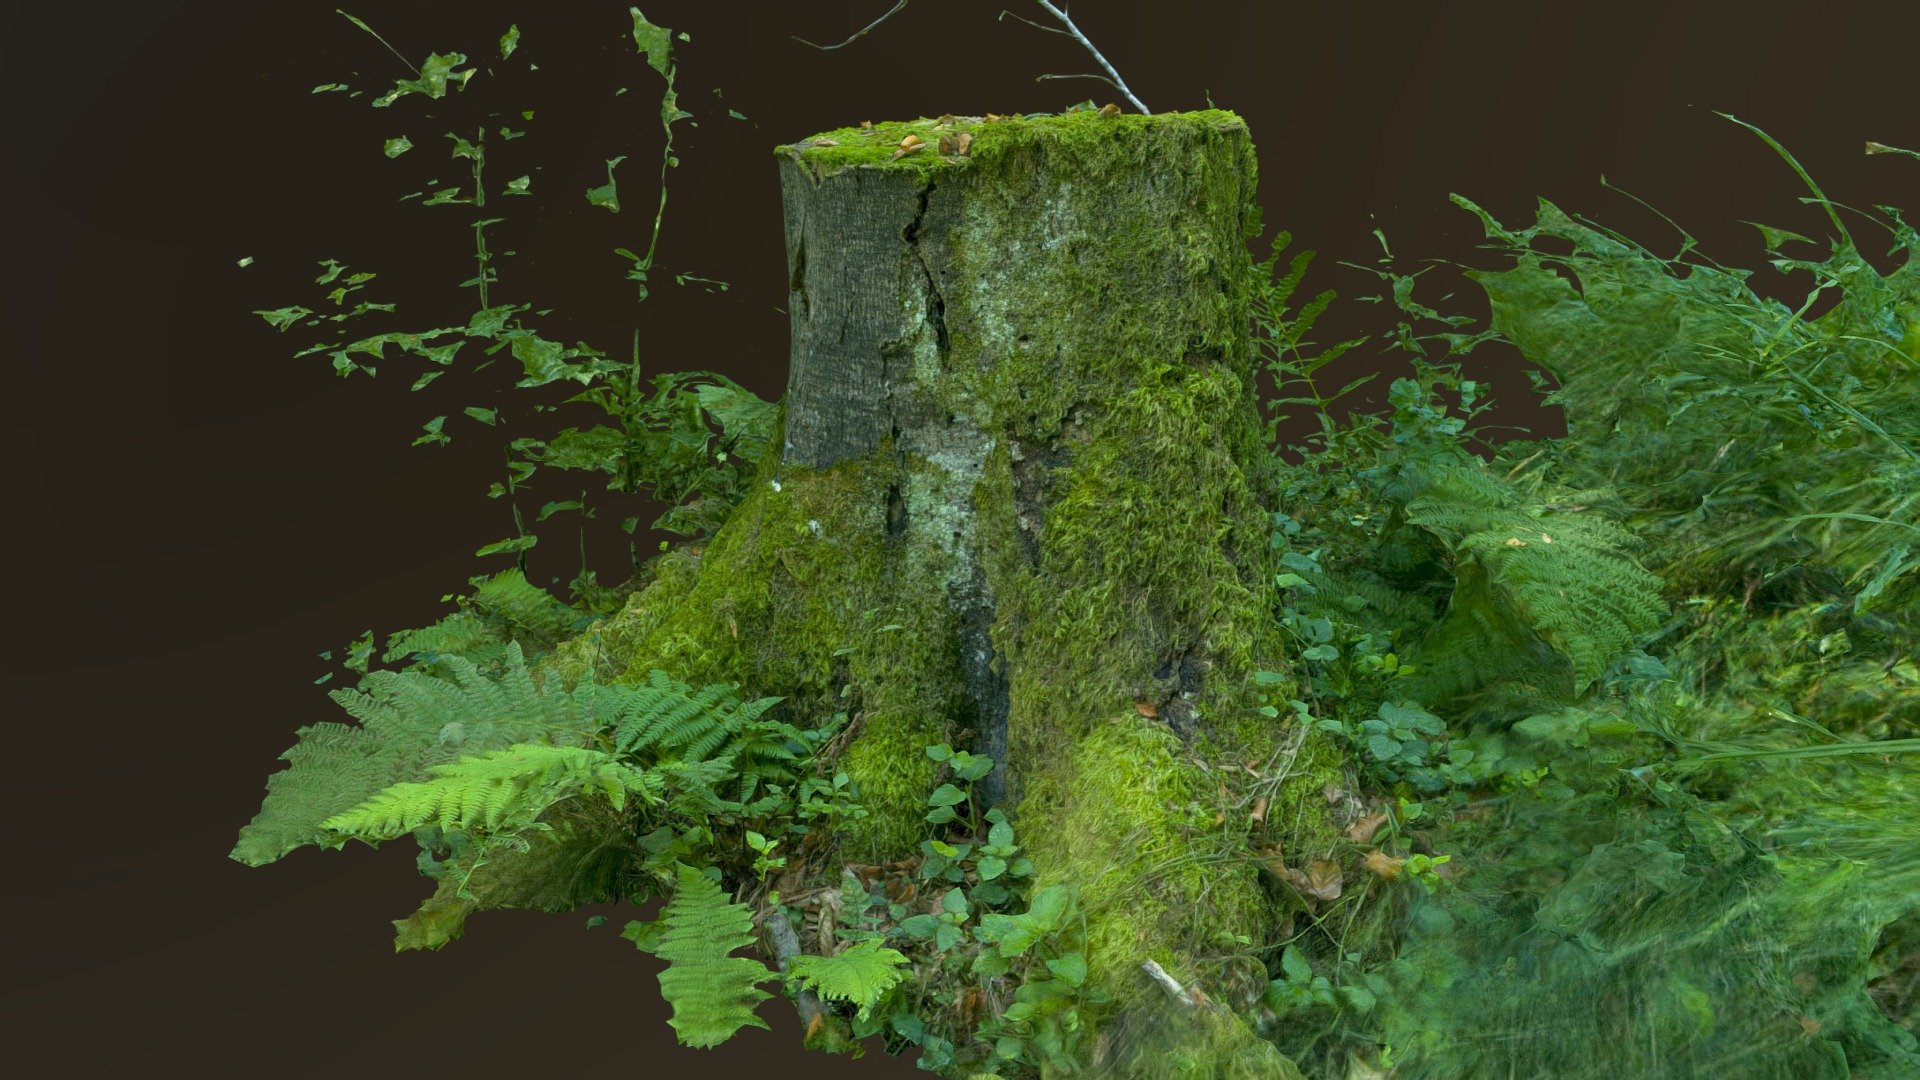 Scan of an bigger mossy tree stump.

Sound is from freesound.org - Bigger mossy tree stump - Download Free 3D model by nedo 3d model